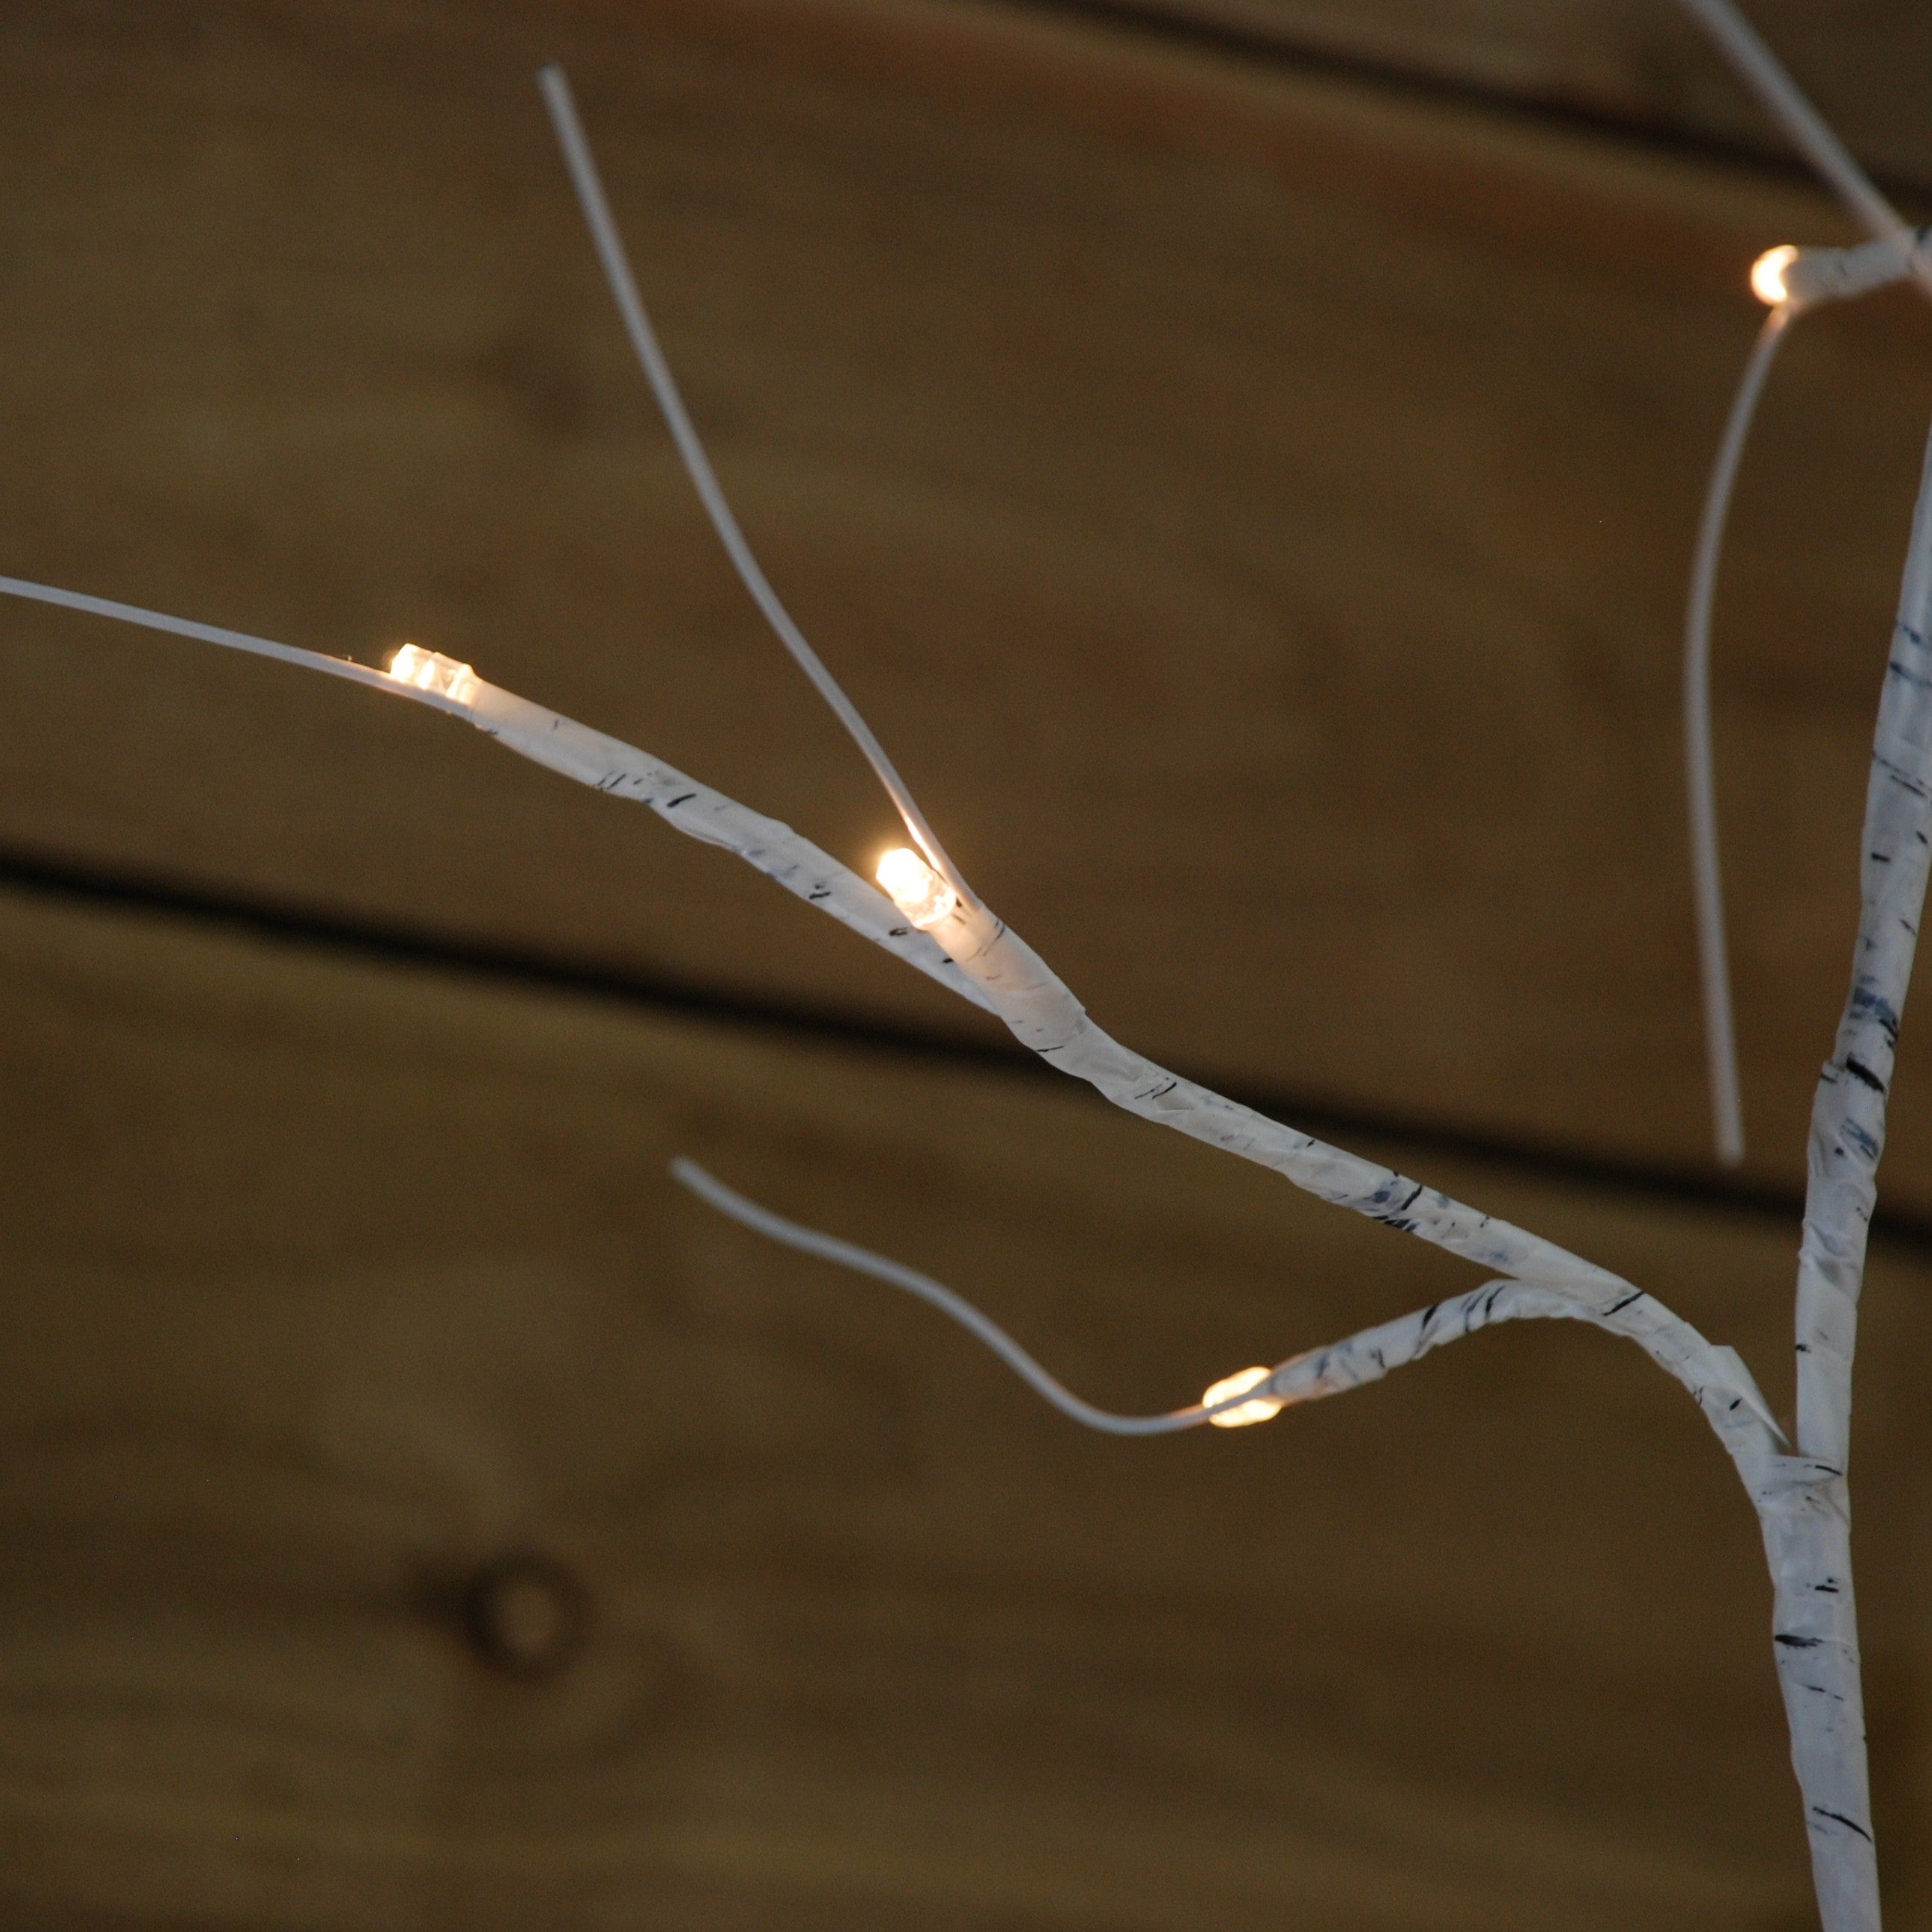 1.5m Christmas Twinkling Birch Tree with Warm White LEDs